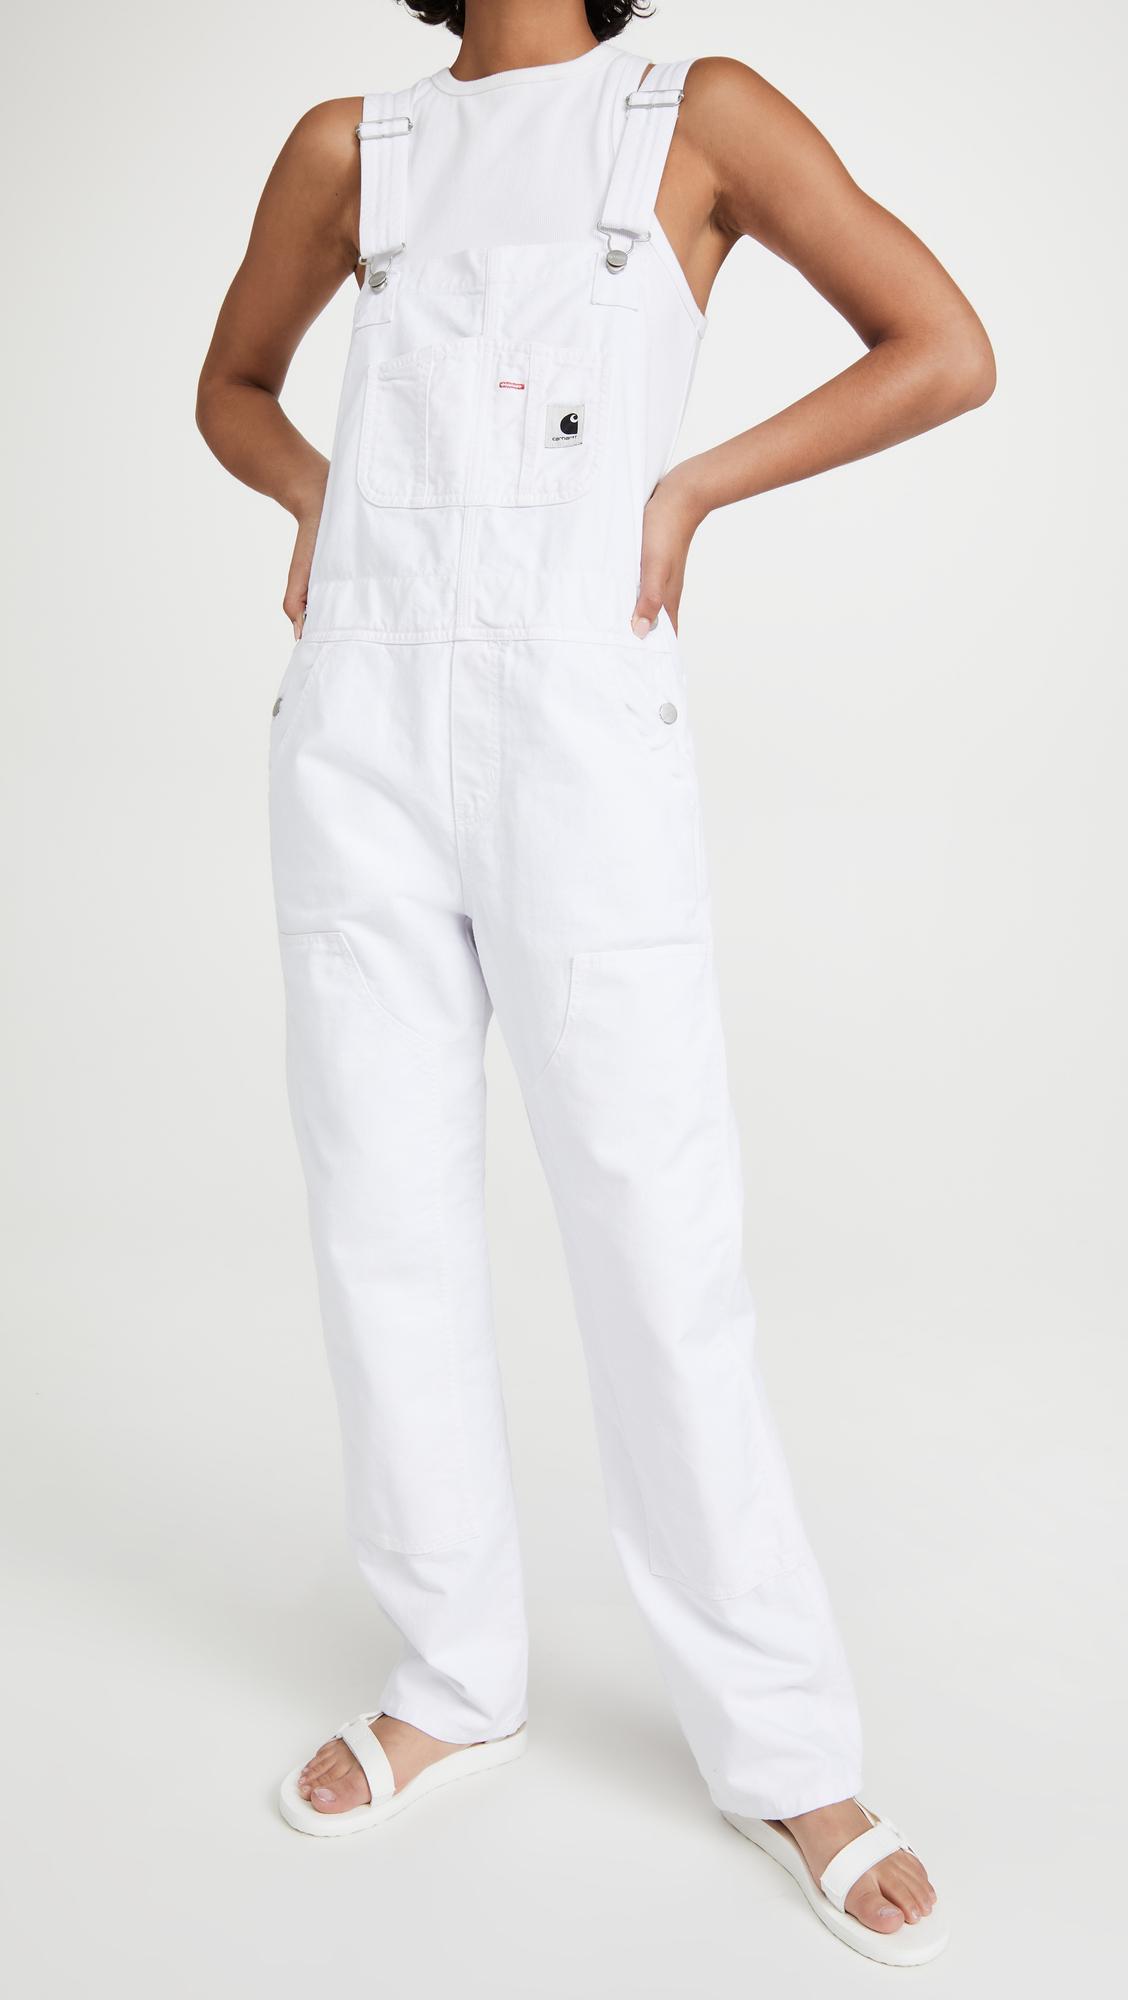 Carhartt WIP Sonora Overalls in White | Lyst Canada